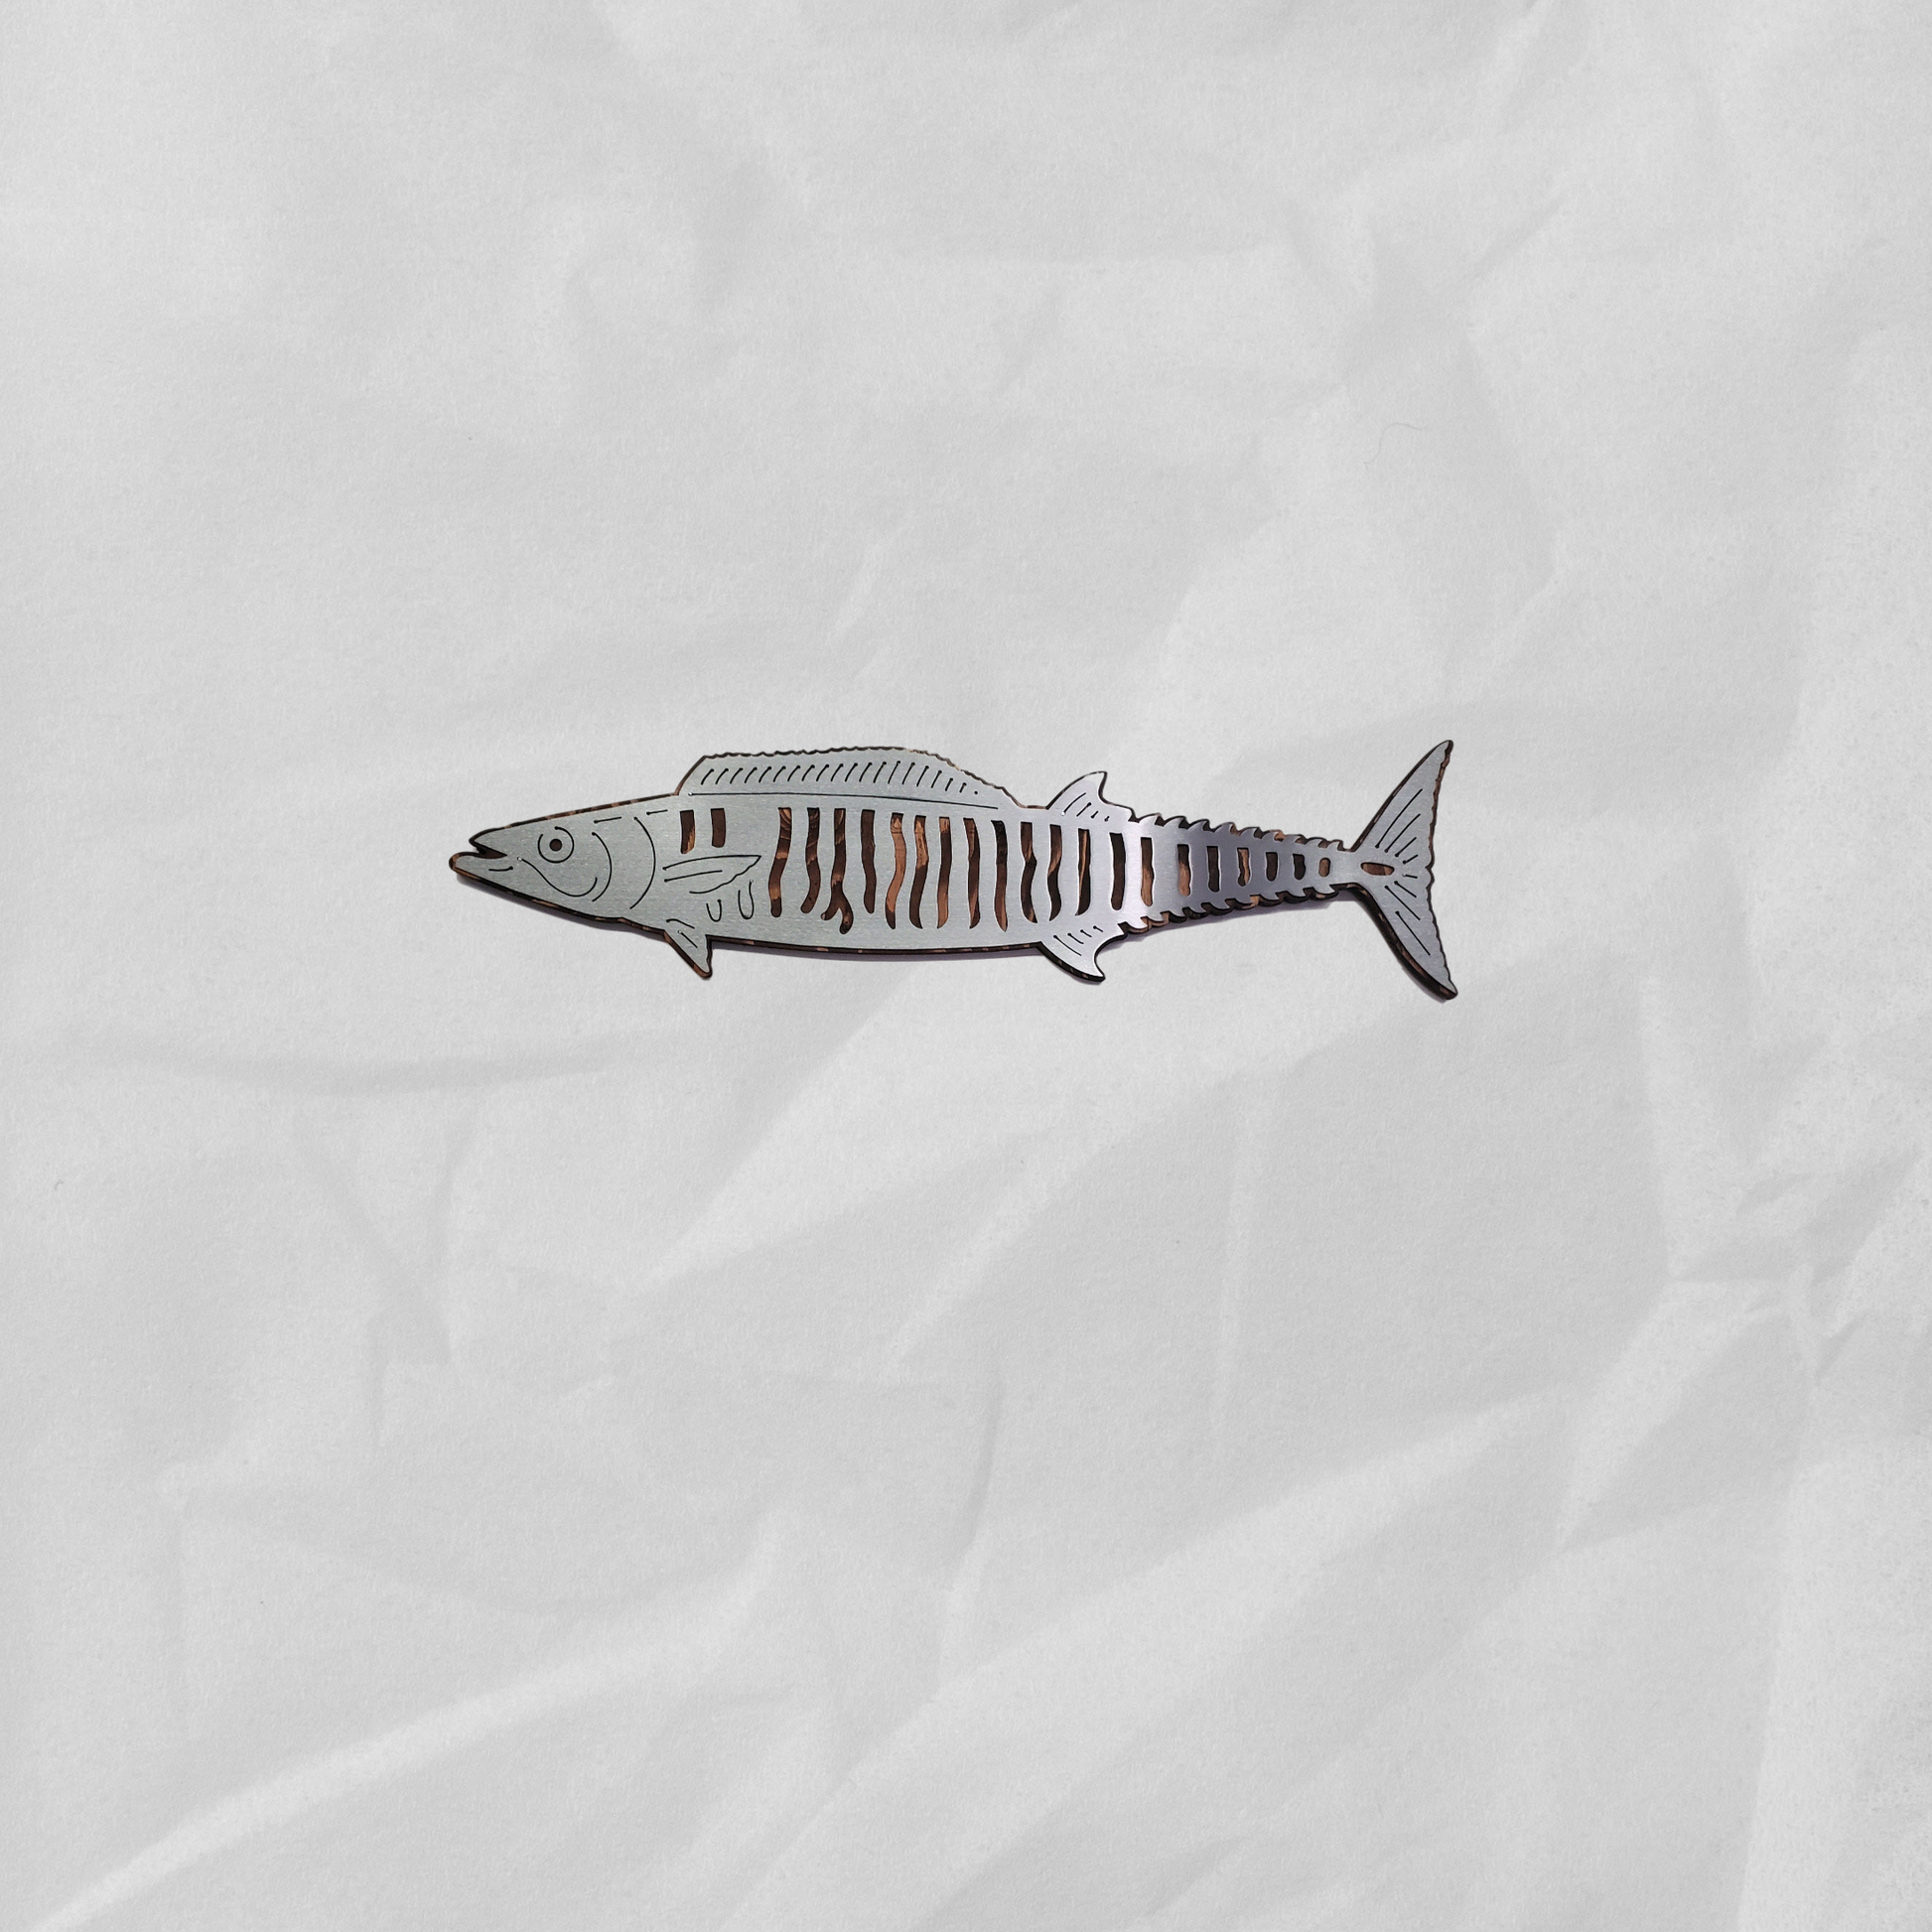 Wahoo Fish Metal Cutout on Stained Wood Background, A Unique and Stylish wall decor piece, made of metal cutout of Wahoo fish shape on a stained wood background, it comes with saw tooth style hanger for easy mounting